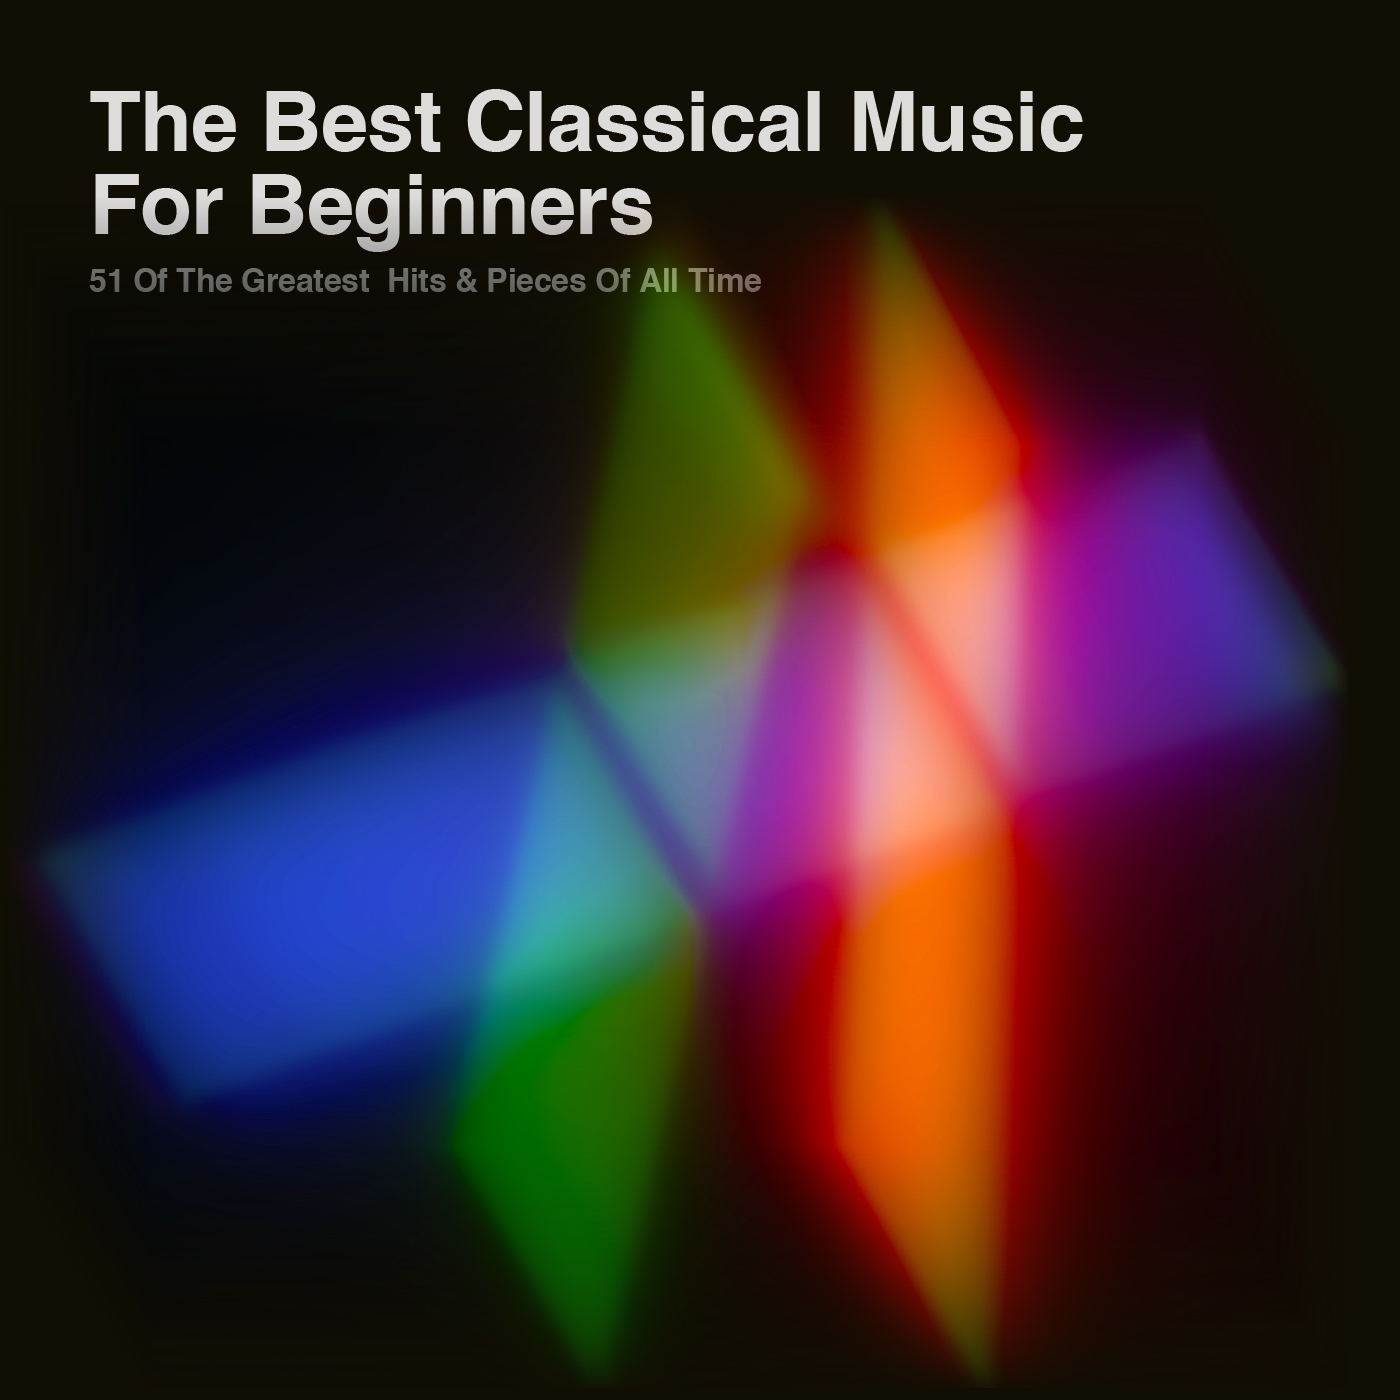 The Best Classical Music for Beginners: 51 Of The Greatest Hits & Pieces Of All Time